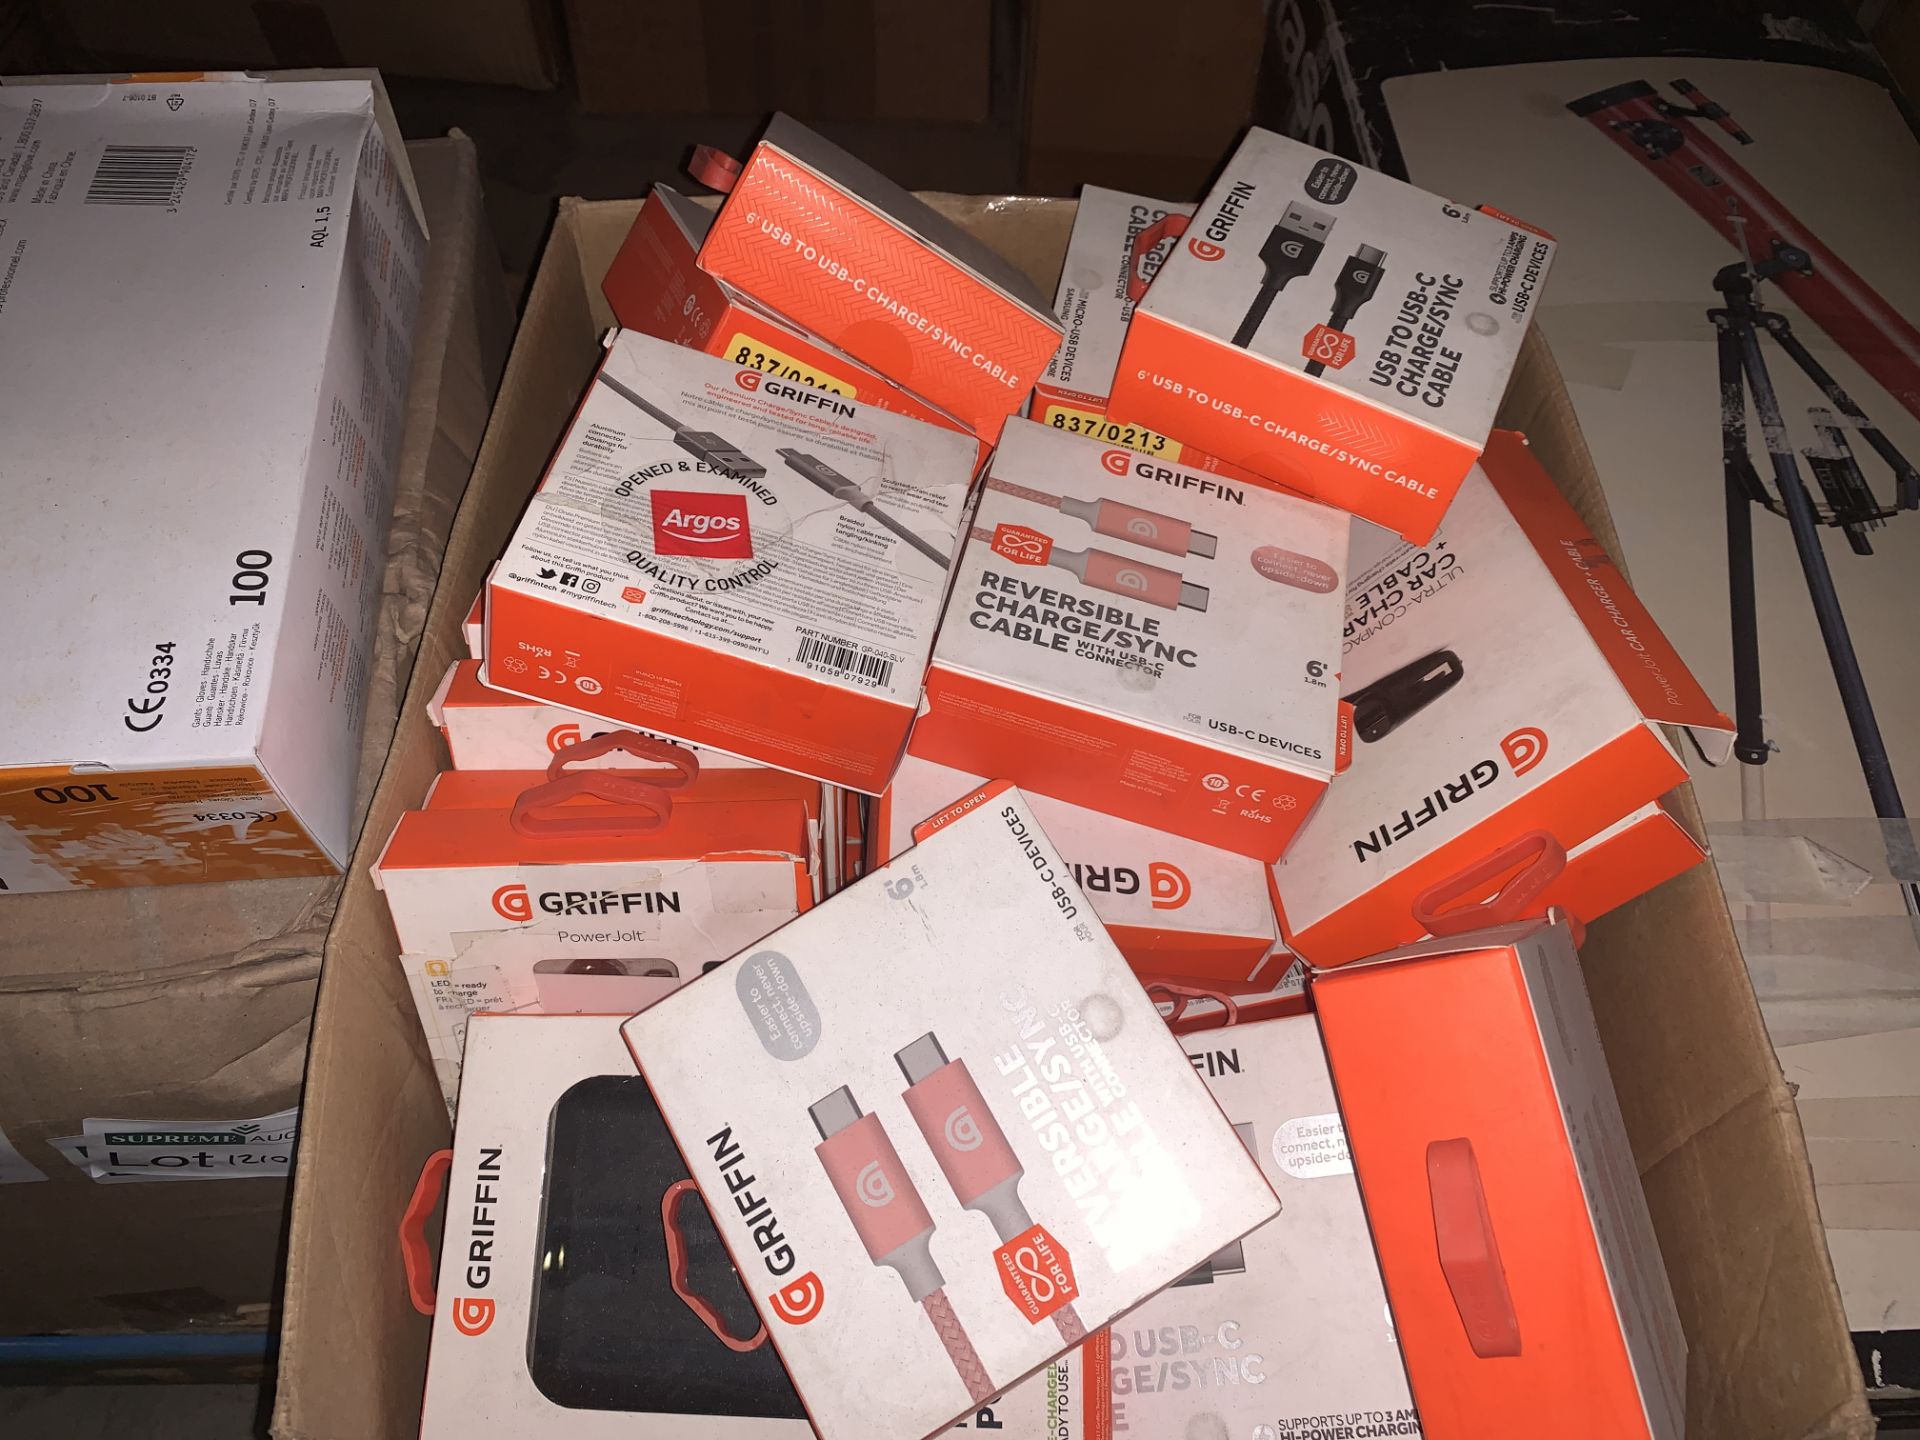 FULL BOX OF VARIOUS GRIFFIN CHARGING CABLES AND POWERBANK ETC